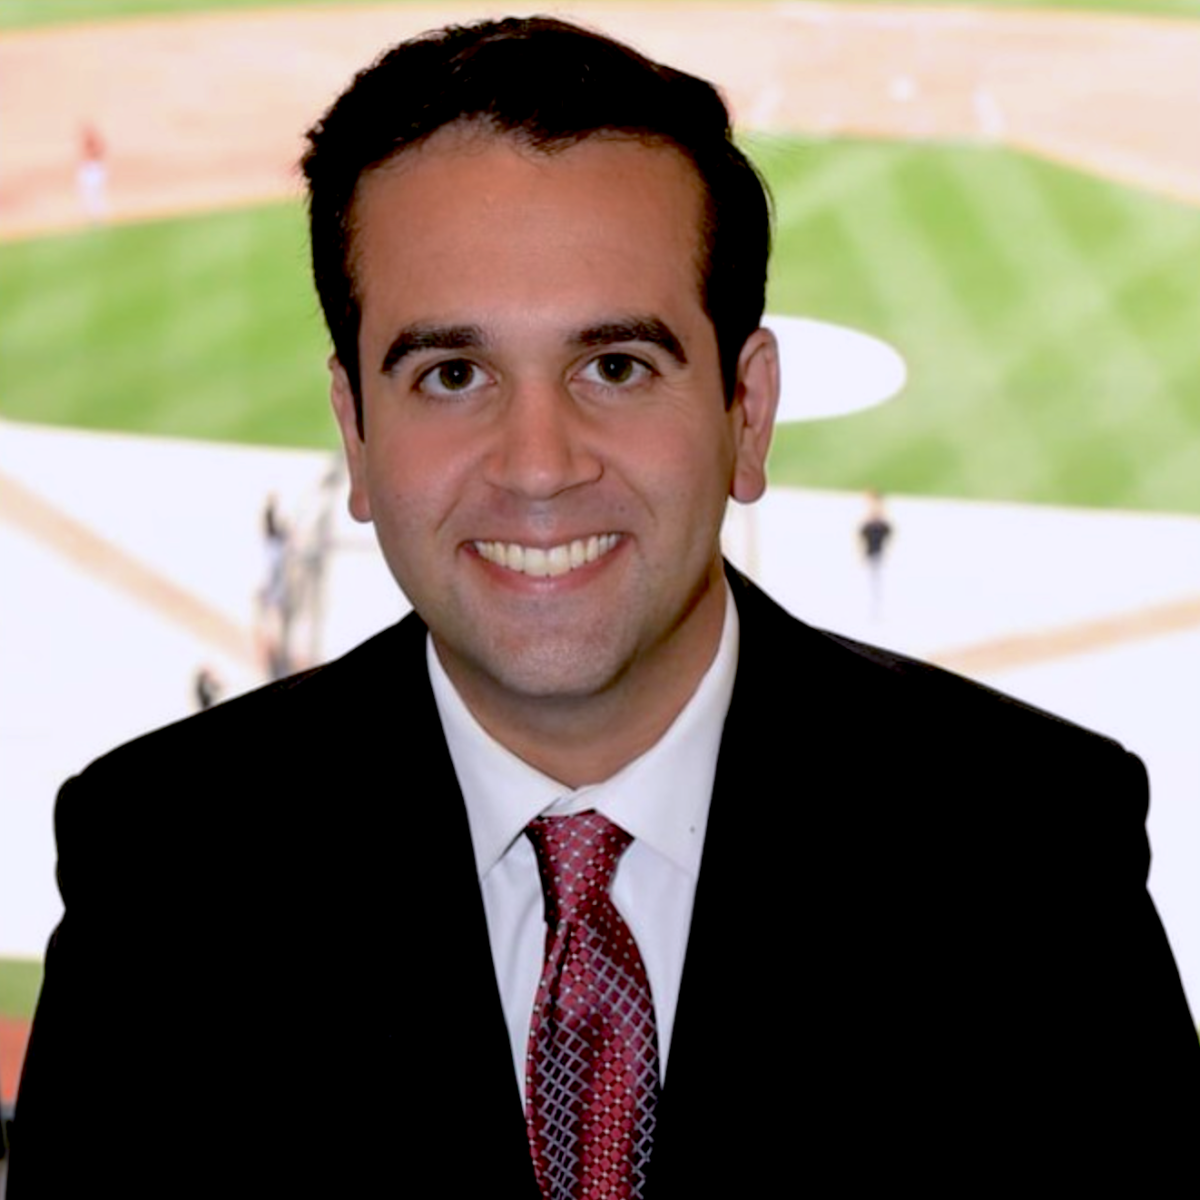 Angels announce Wayne Randazzo as new play-by-play announcer - Los